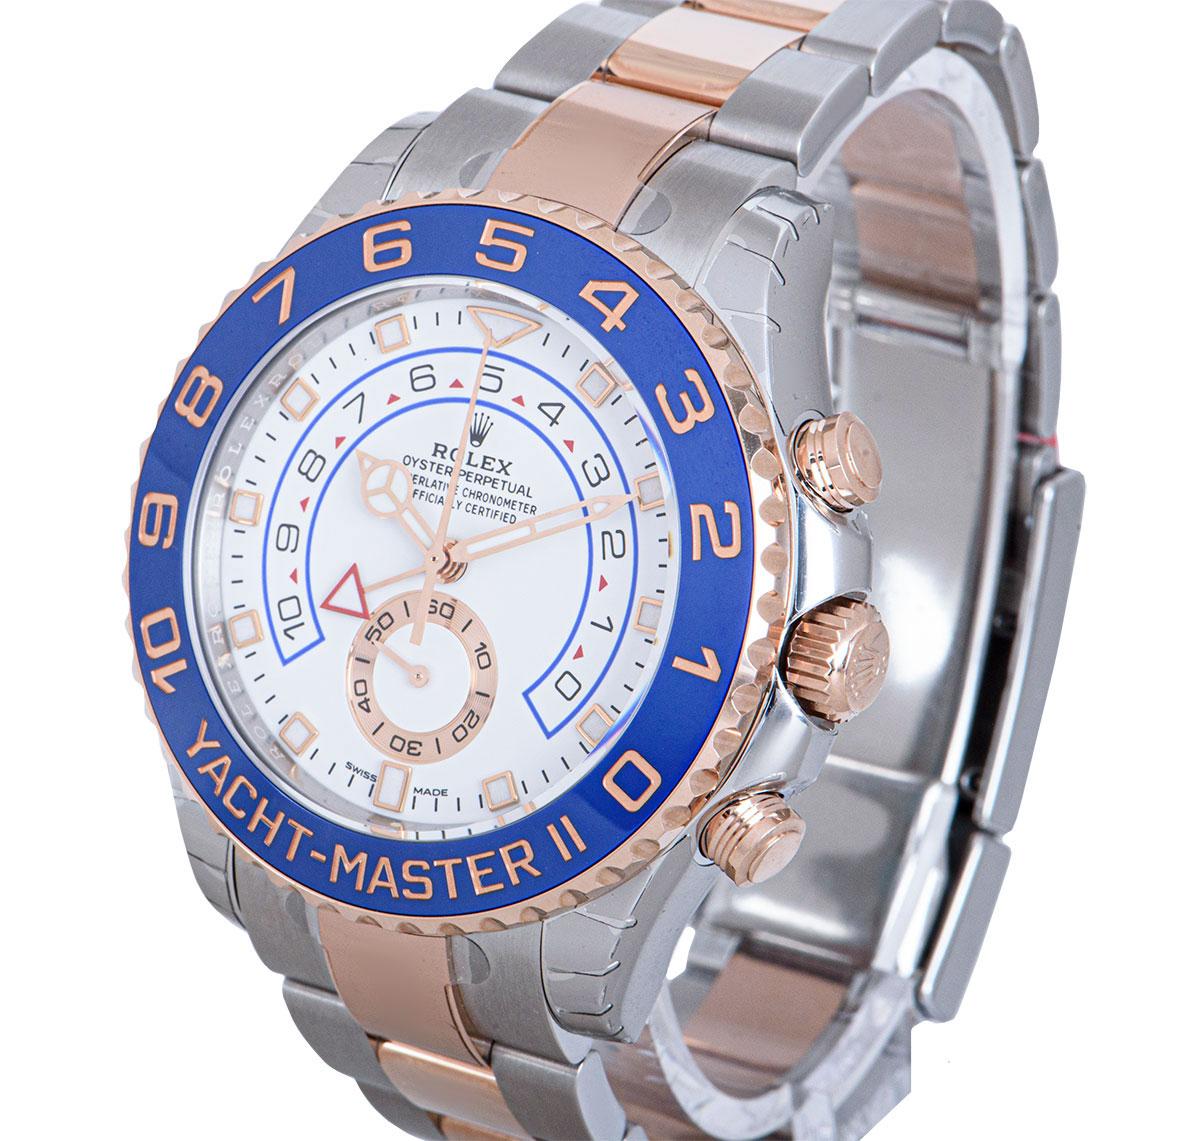 An Unworn Stainless Steel & 18k Rose Gold Oyster Perpetual Yacht-Master II Gents Wristwatch, white dial with applied hour markers, small seconds at 6 0'clock, an 18k rose gold uni-directional rotating bezel with a blue cerachrom insert and 10 minute